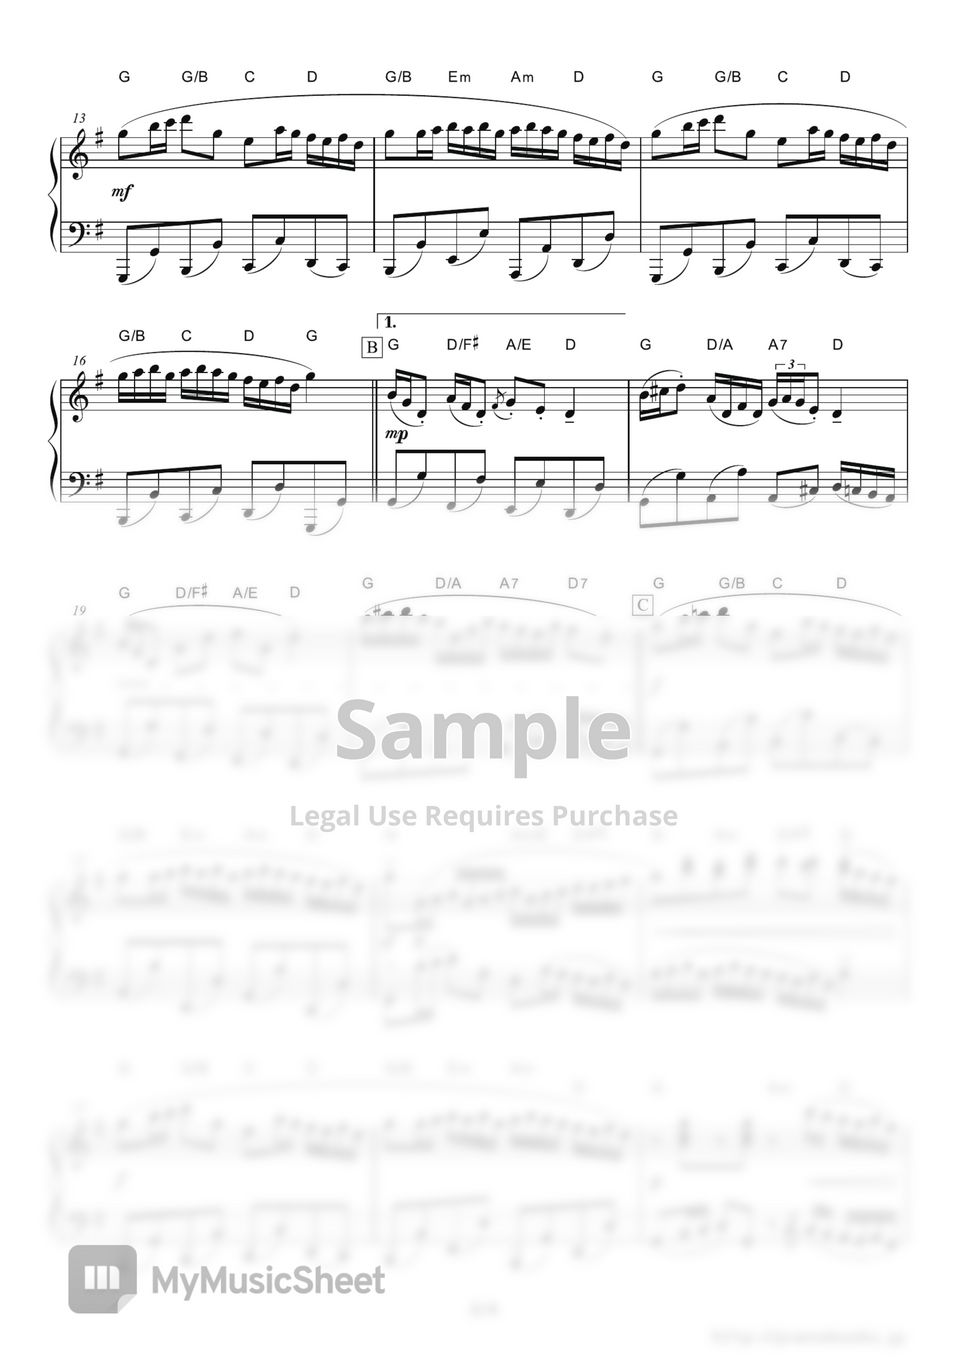 Disney - Theme of Electrical Parade (Opening theme song of Disney Land 『ELECTRICAL PARADE』) by PianoBooks